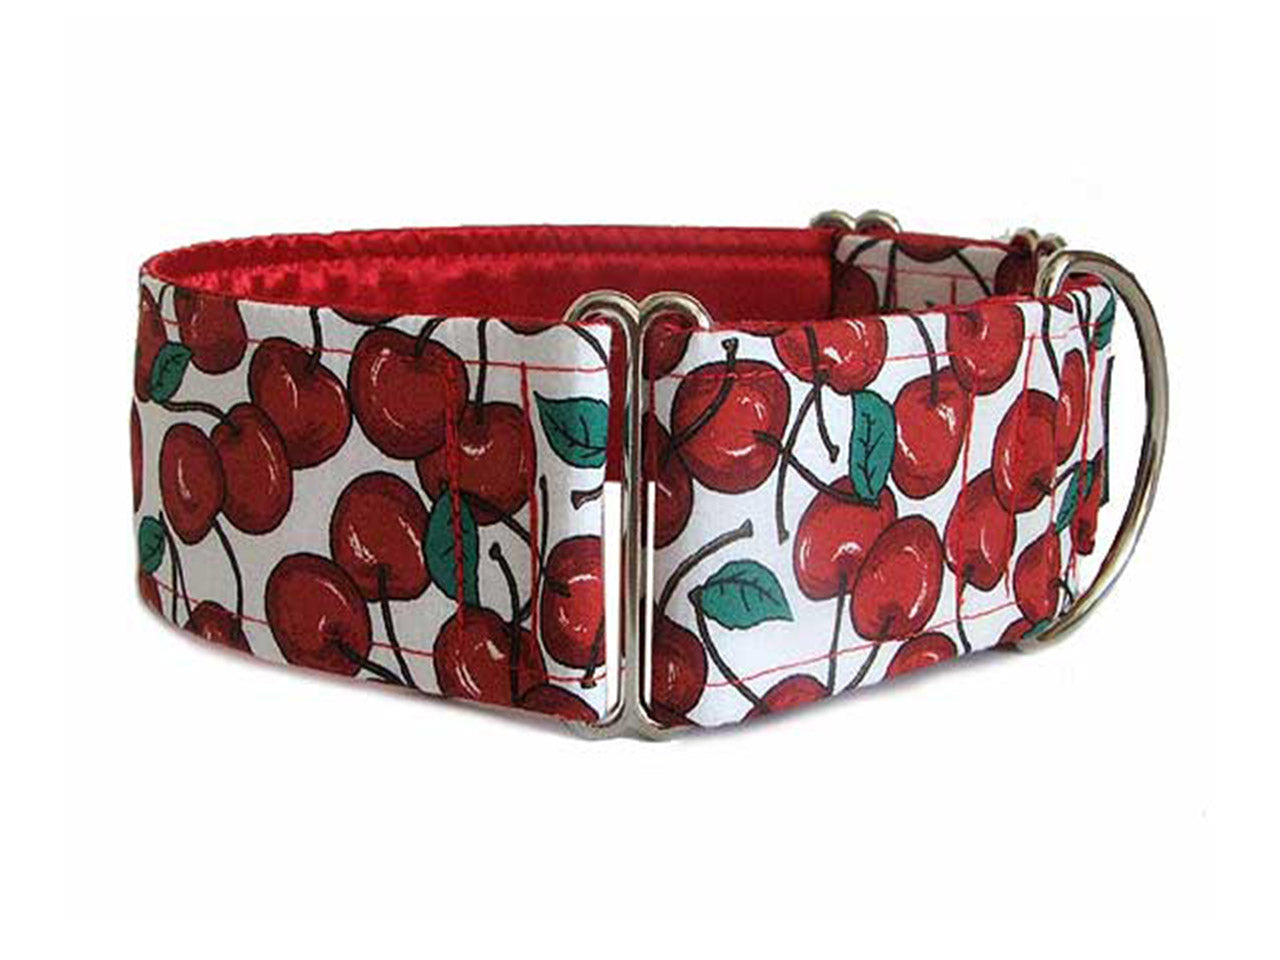 Bright red cherries add a dash of pizzazz to any pup's wardrobe!